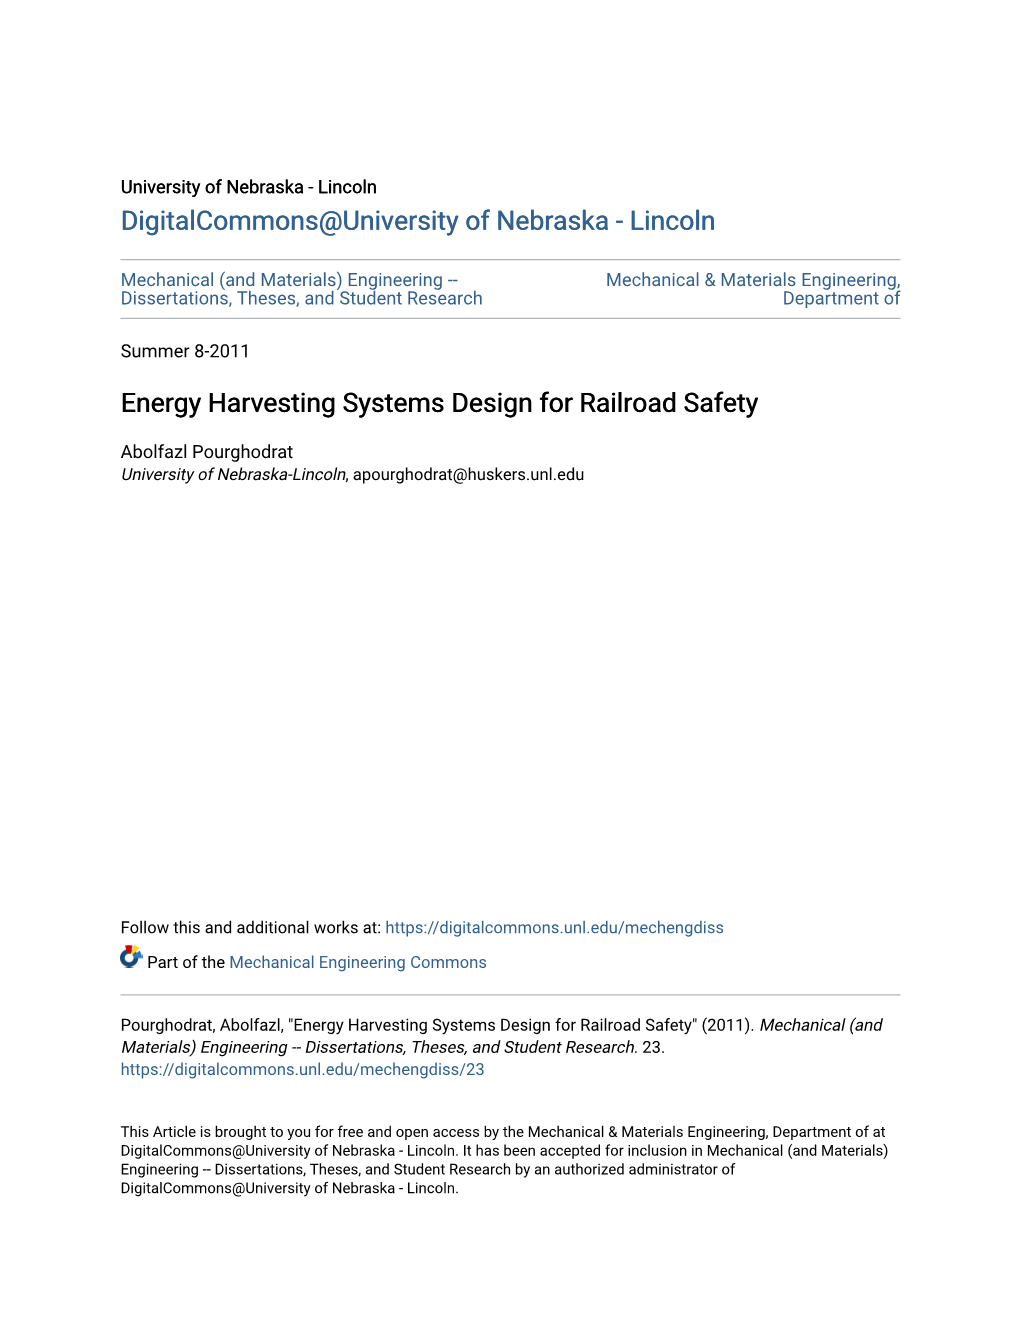 Energy Harvesting Systems Design for Railroad Safety